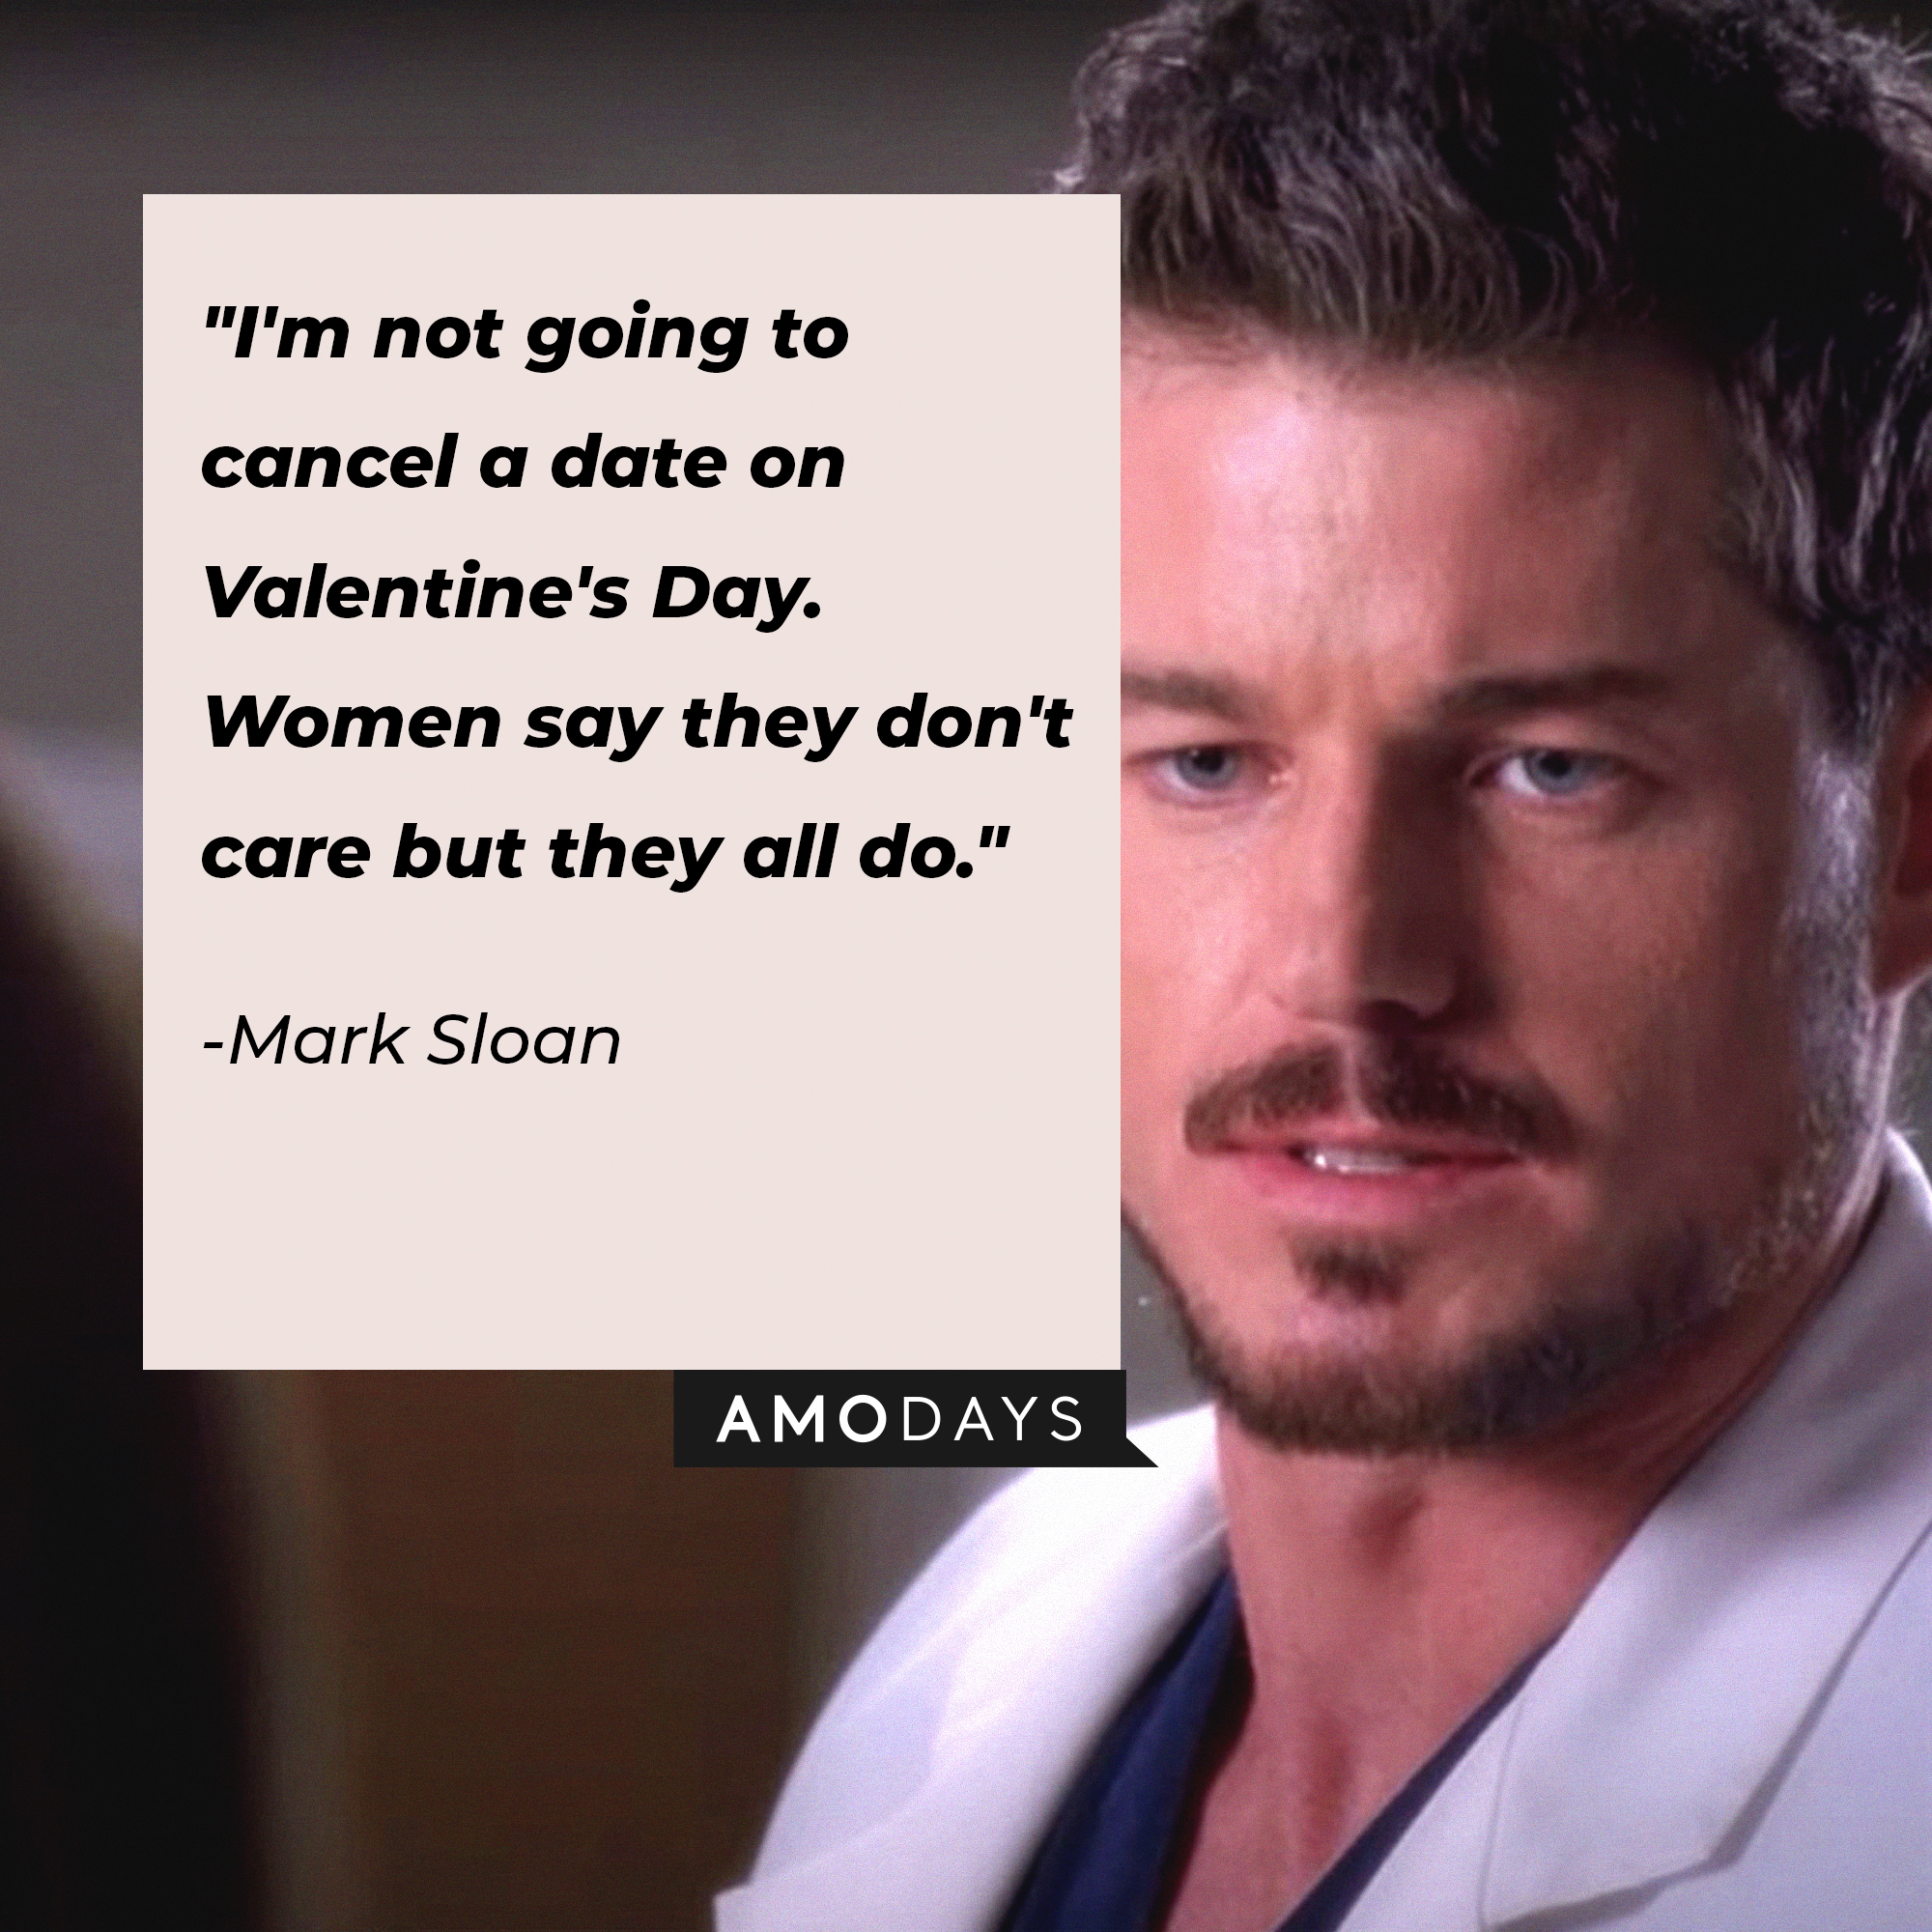 Mark Sloan's quote: "I'm not going to cancel a date on Valentine's Day. Women say they don't care but they all do." | Image: AmoDays